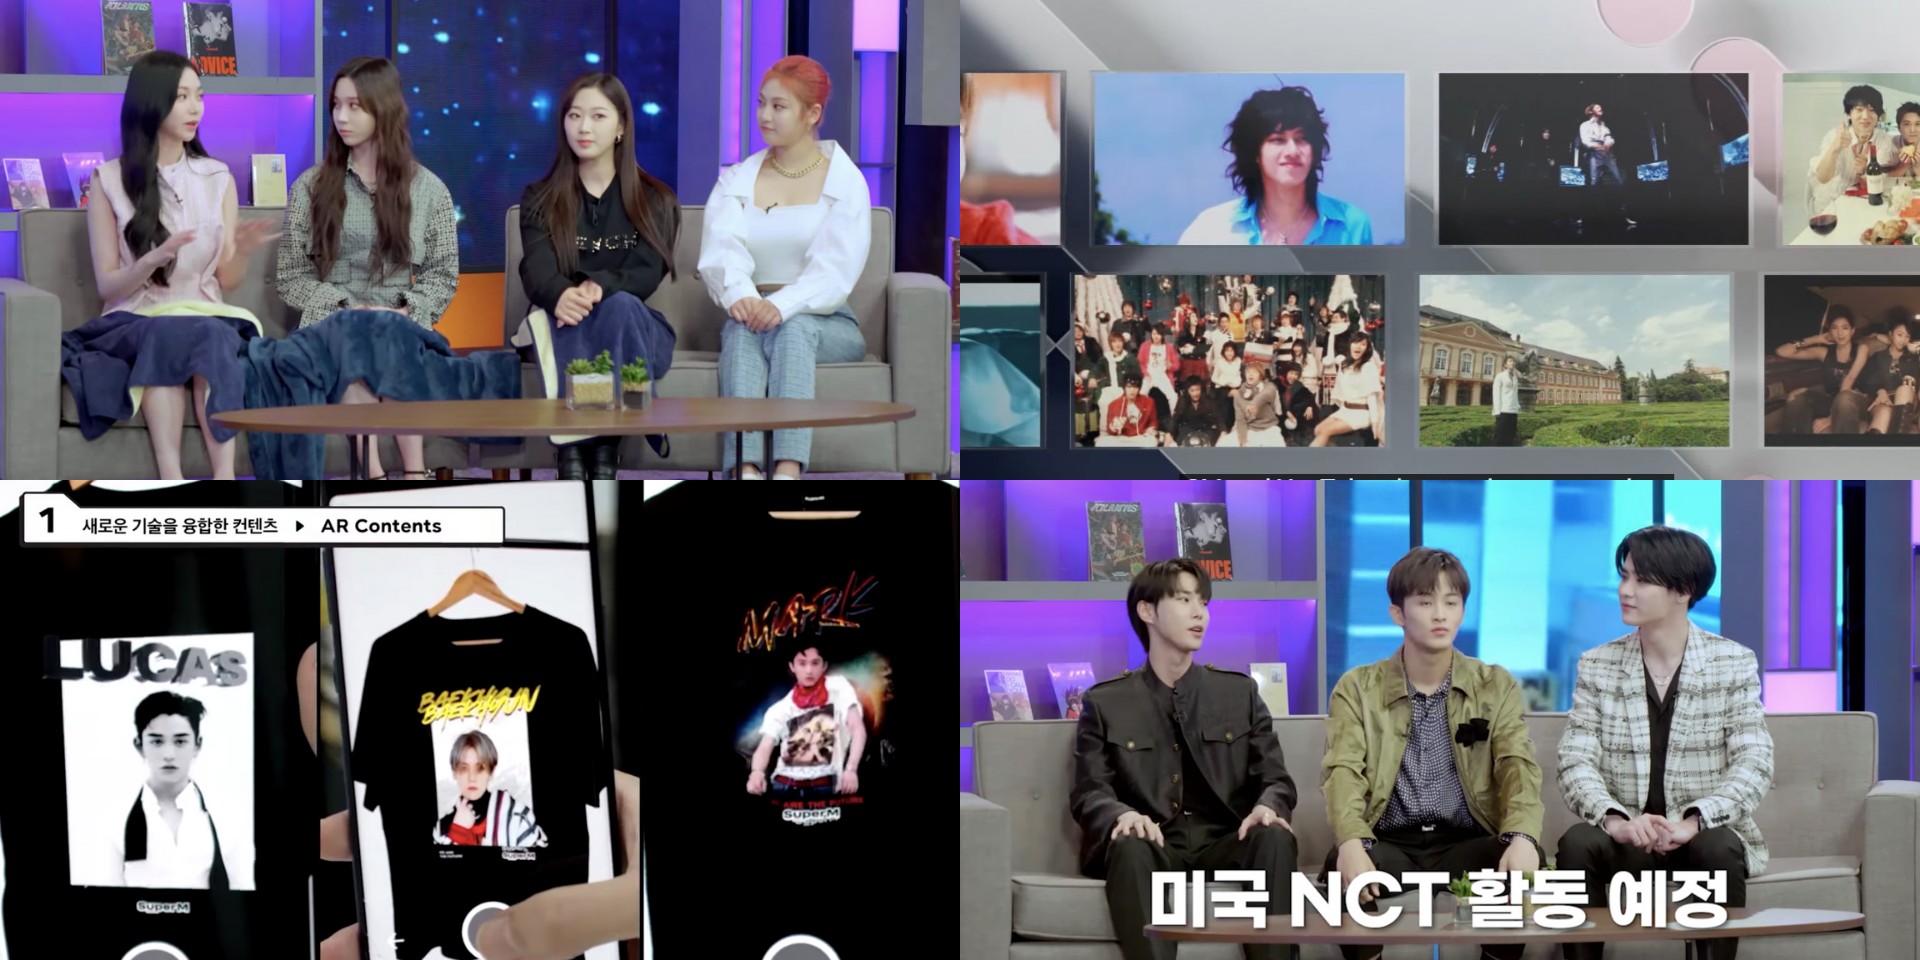 7 highlights from SM Congress 2021: NCT Hollywood, aespa comeback, SM Culture Universe, and more